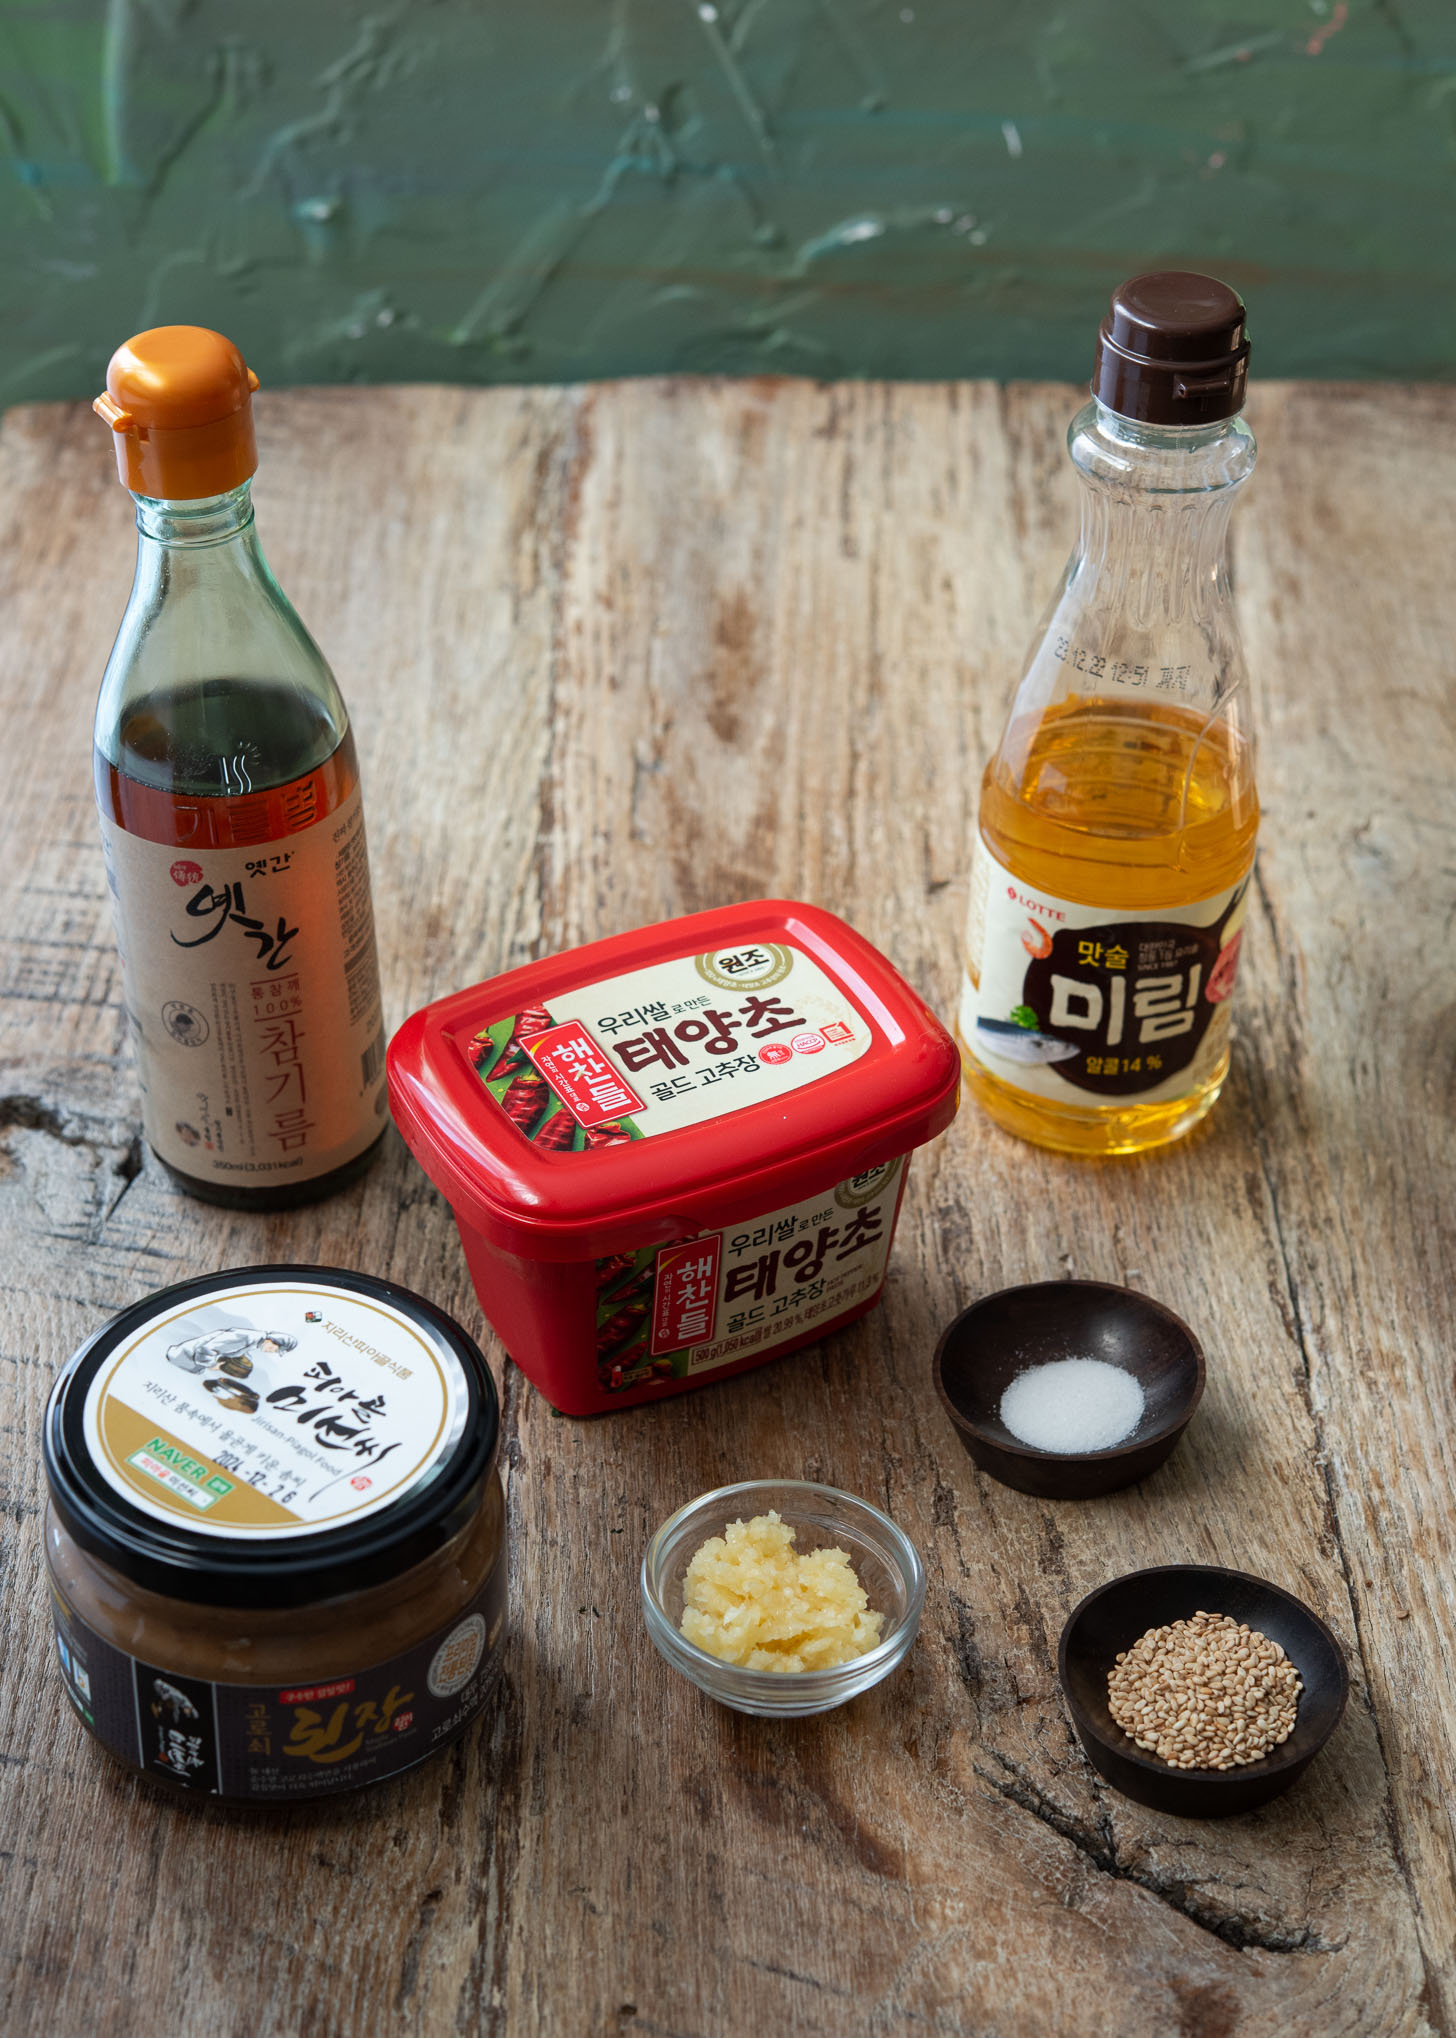 Ingredients for making ssamjang sauce are presented.